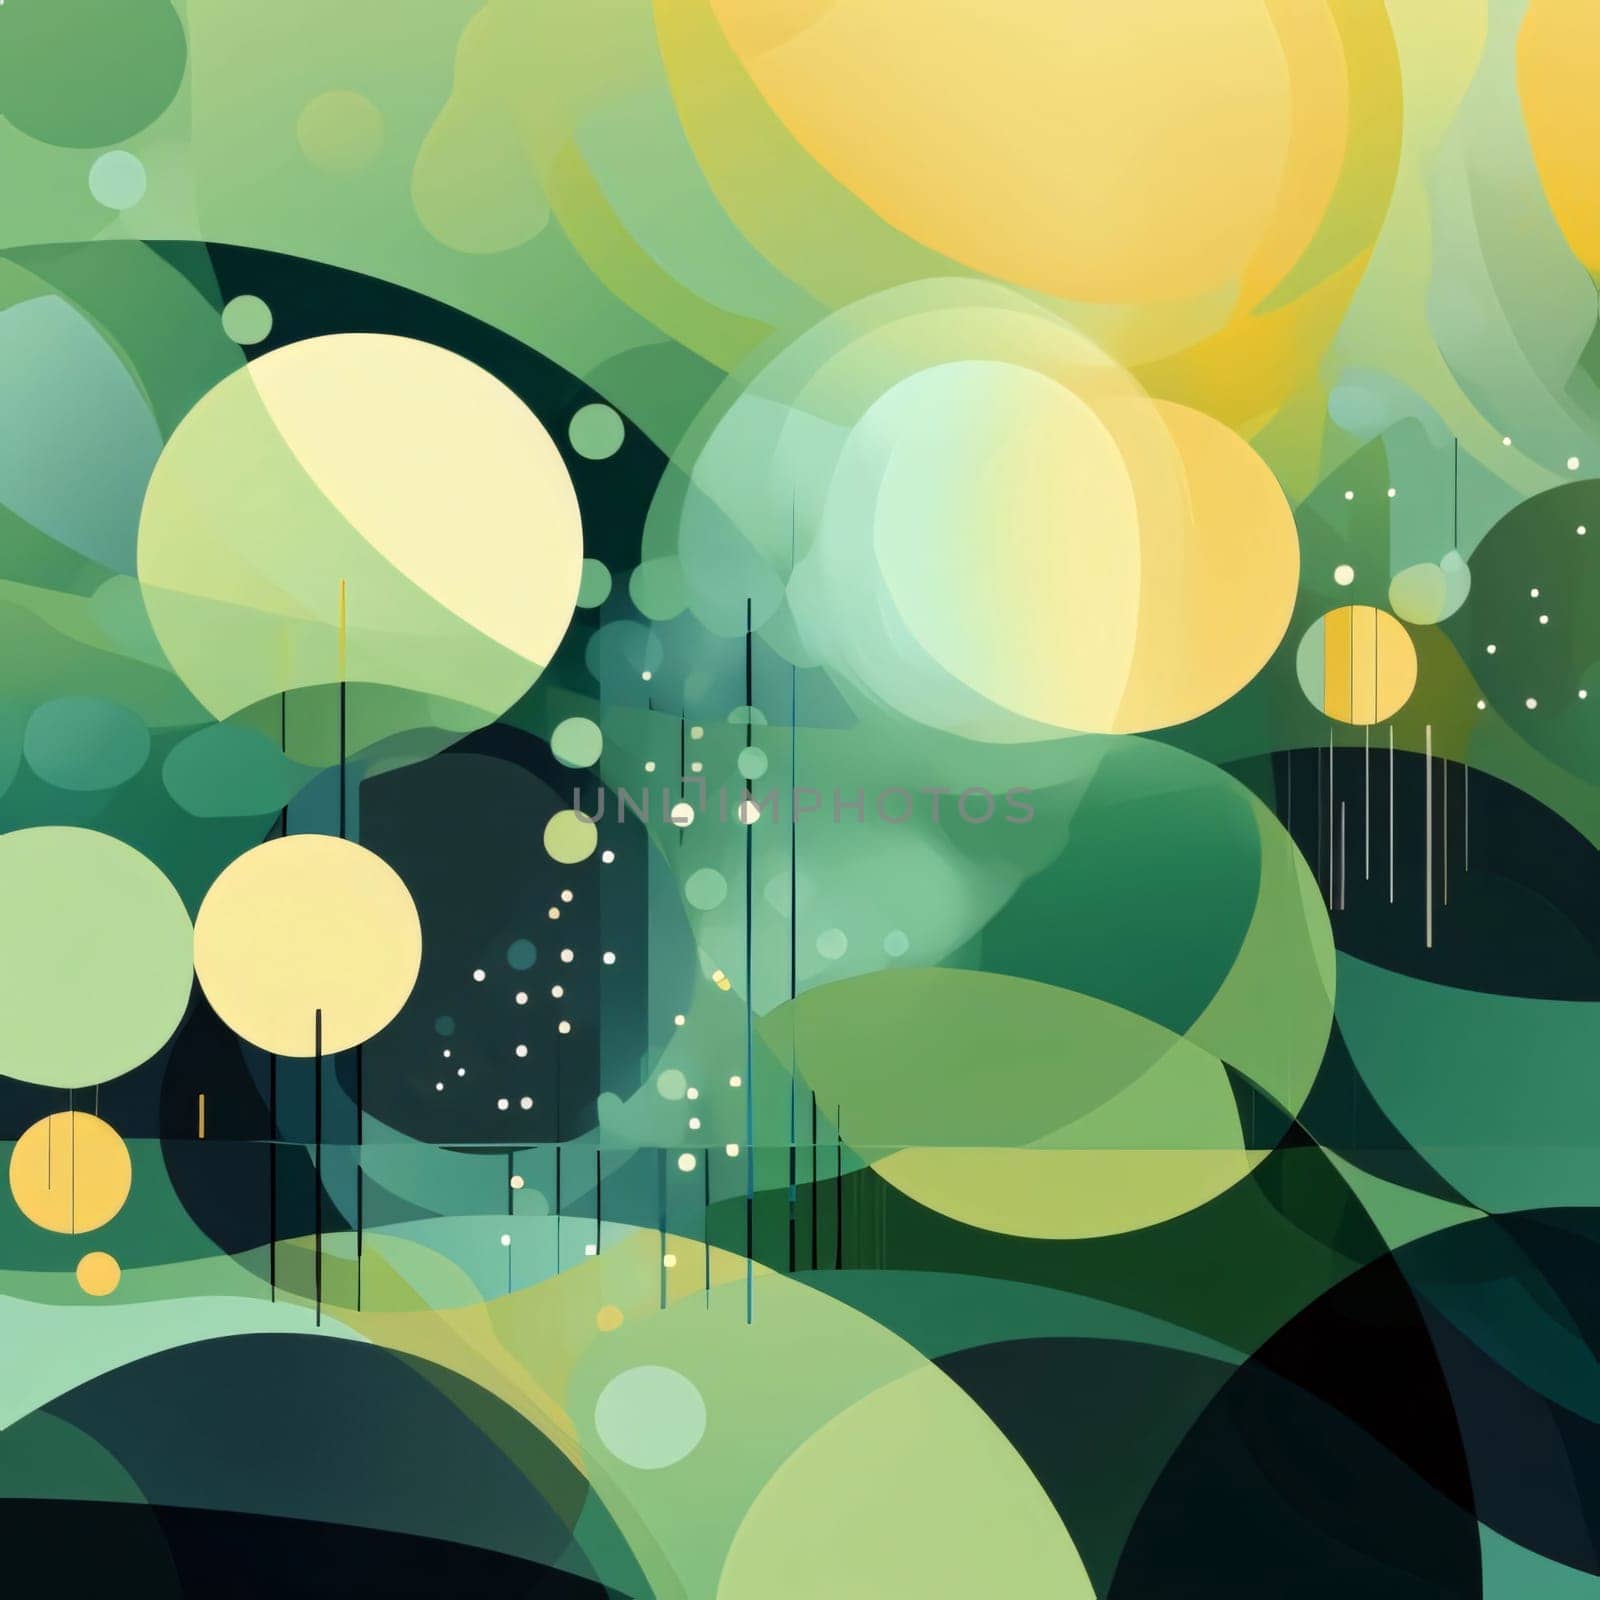 Abstract background design: Abstract background with circles and spots. Vector illustration for your design.